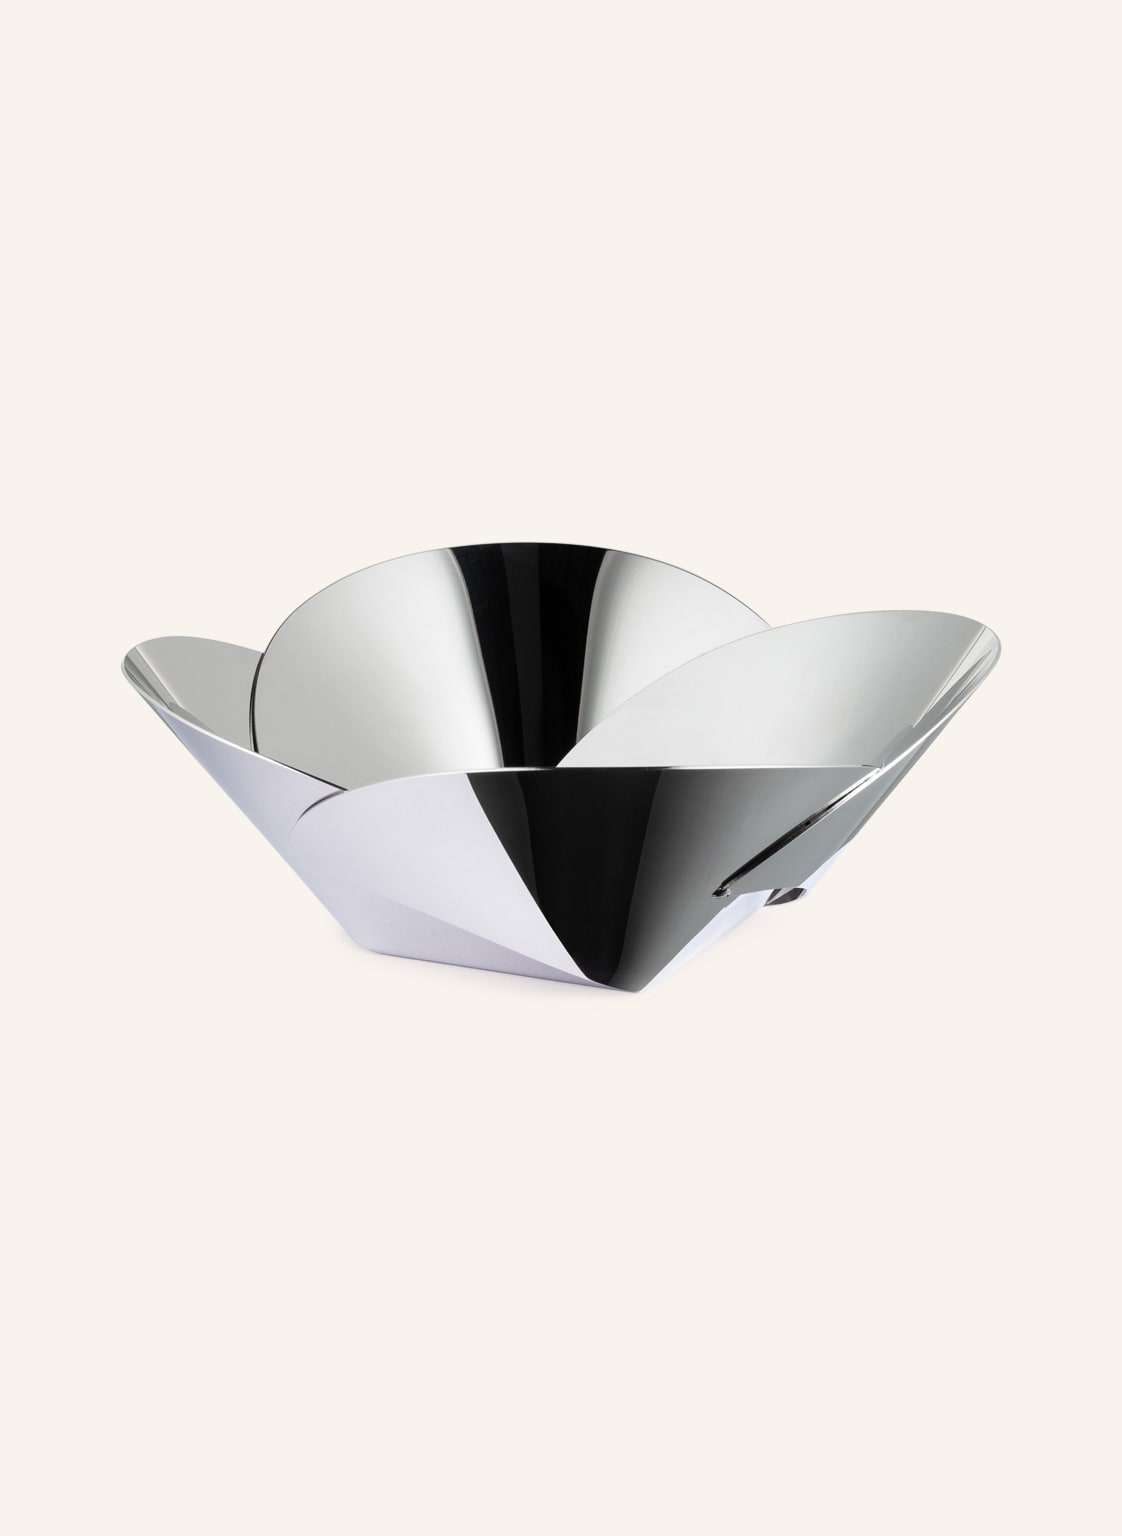 Image of Alessi Schale Pianissimo silber